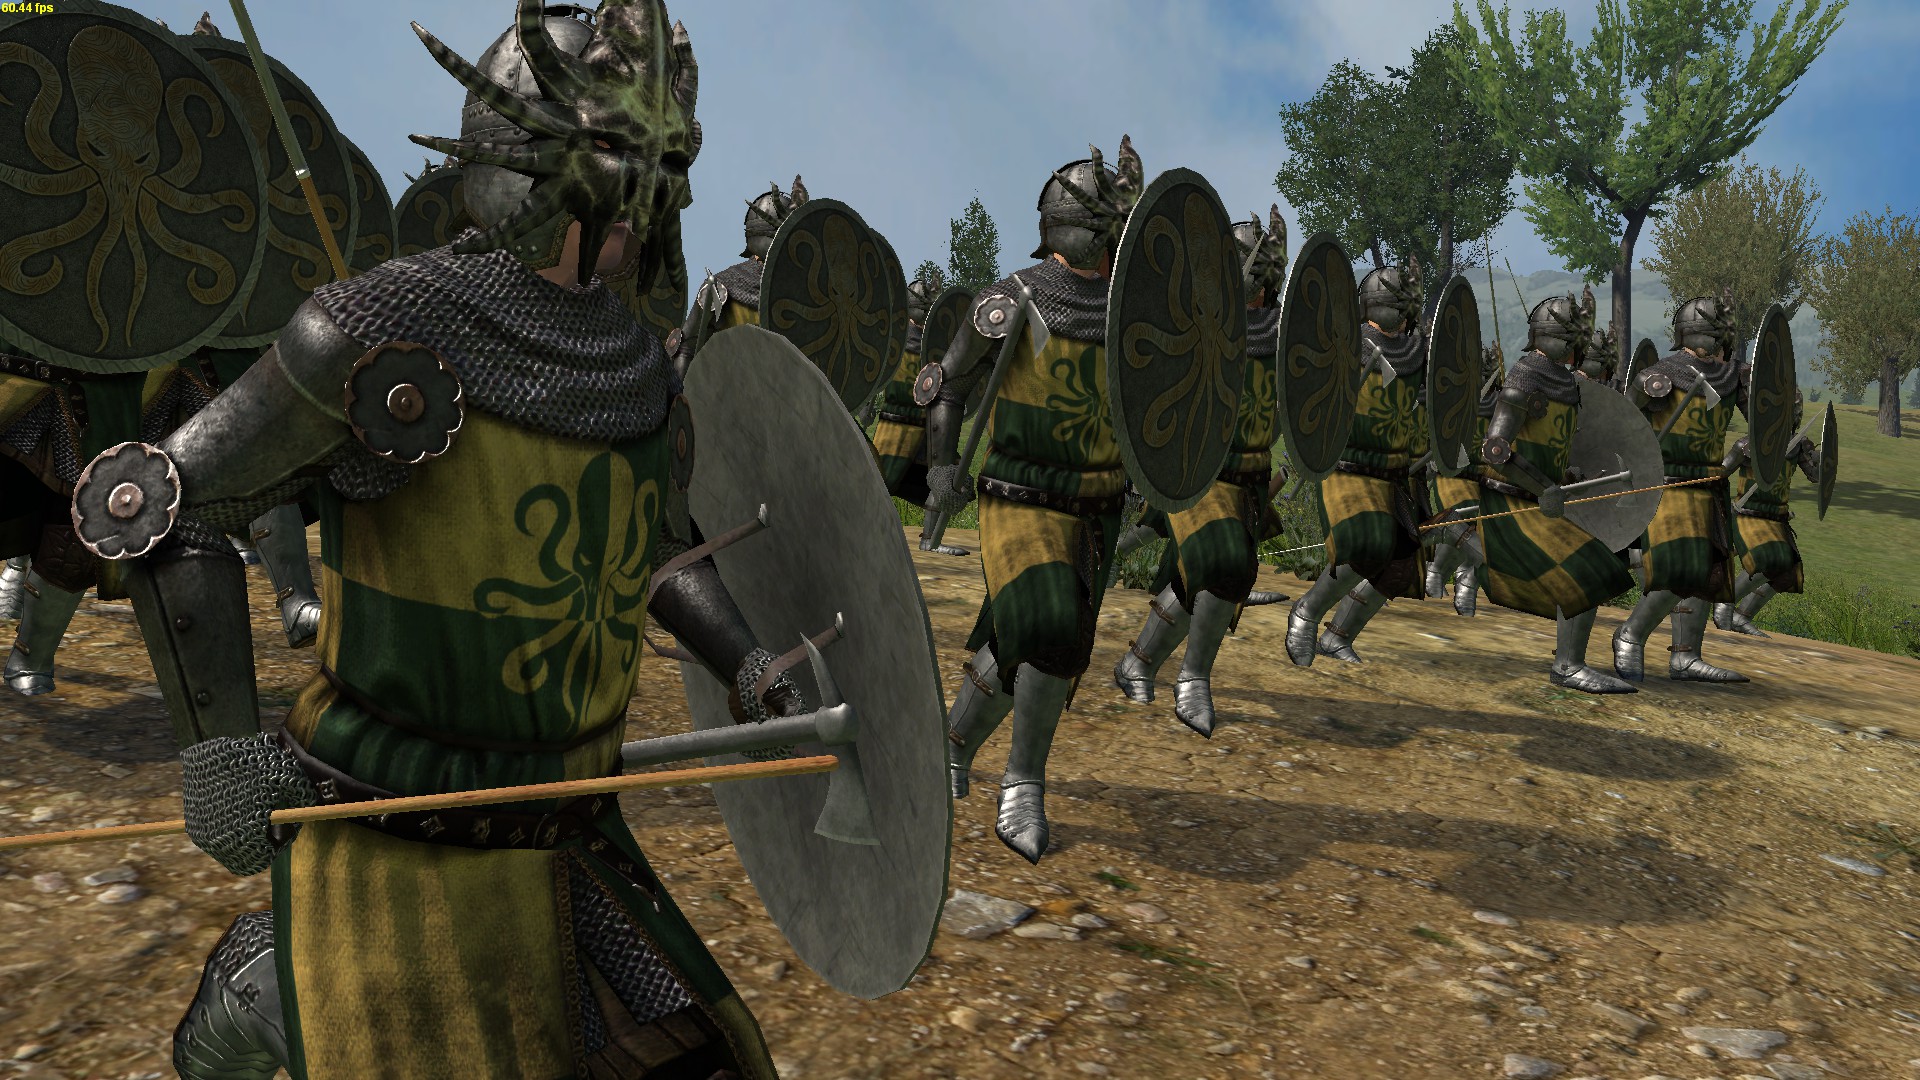 Warband prophesy of pendor 3.9. Warband Prophesy of Pendor. Mount and Blade Prophesy of Pendor 3.9.5. Mount & Blade 2 Prophesy of Pendor. Mount & Blade: Warband.